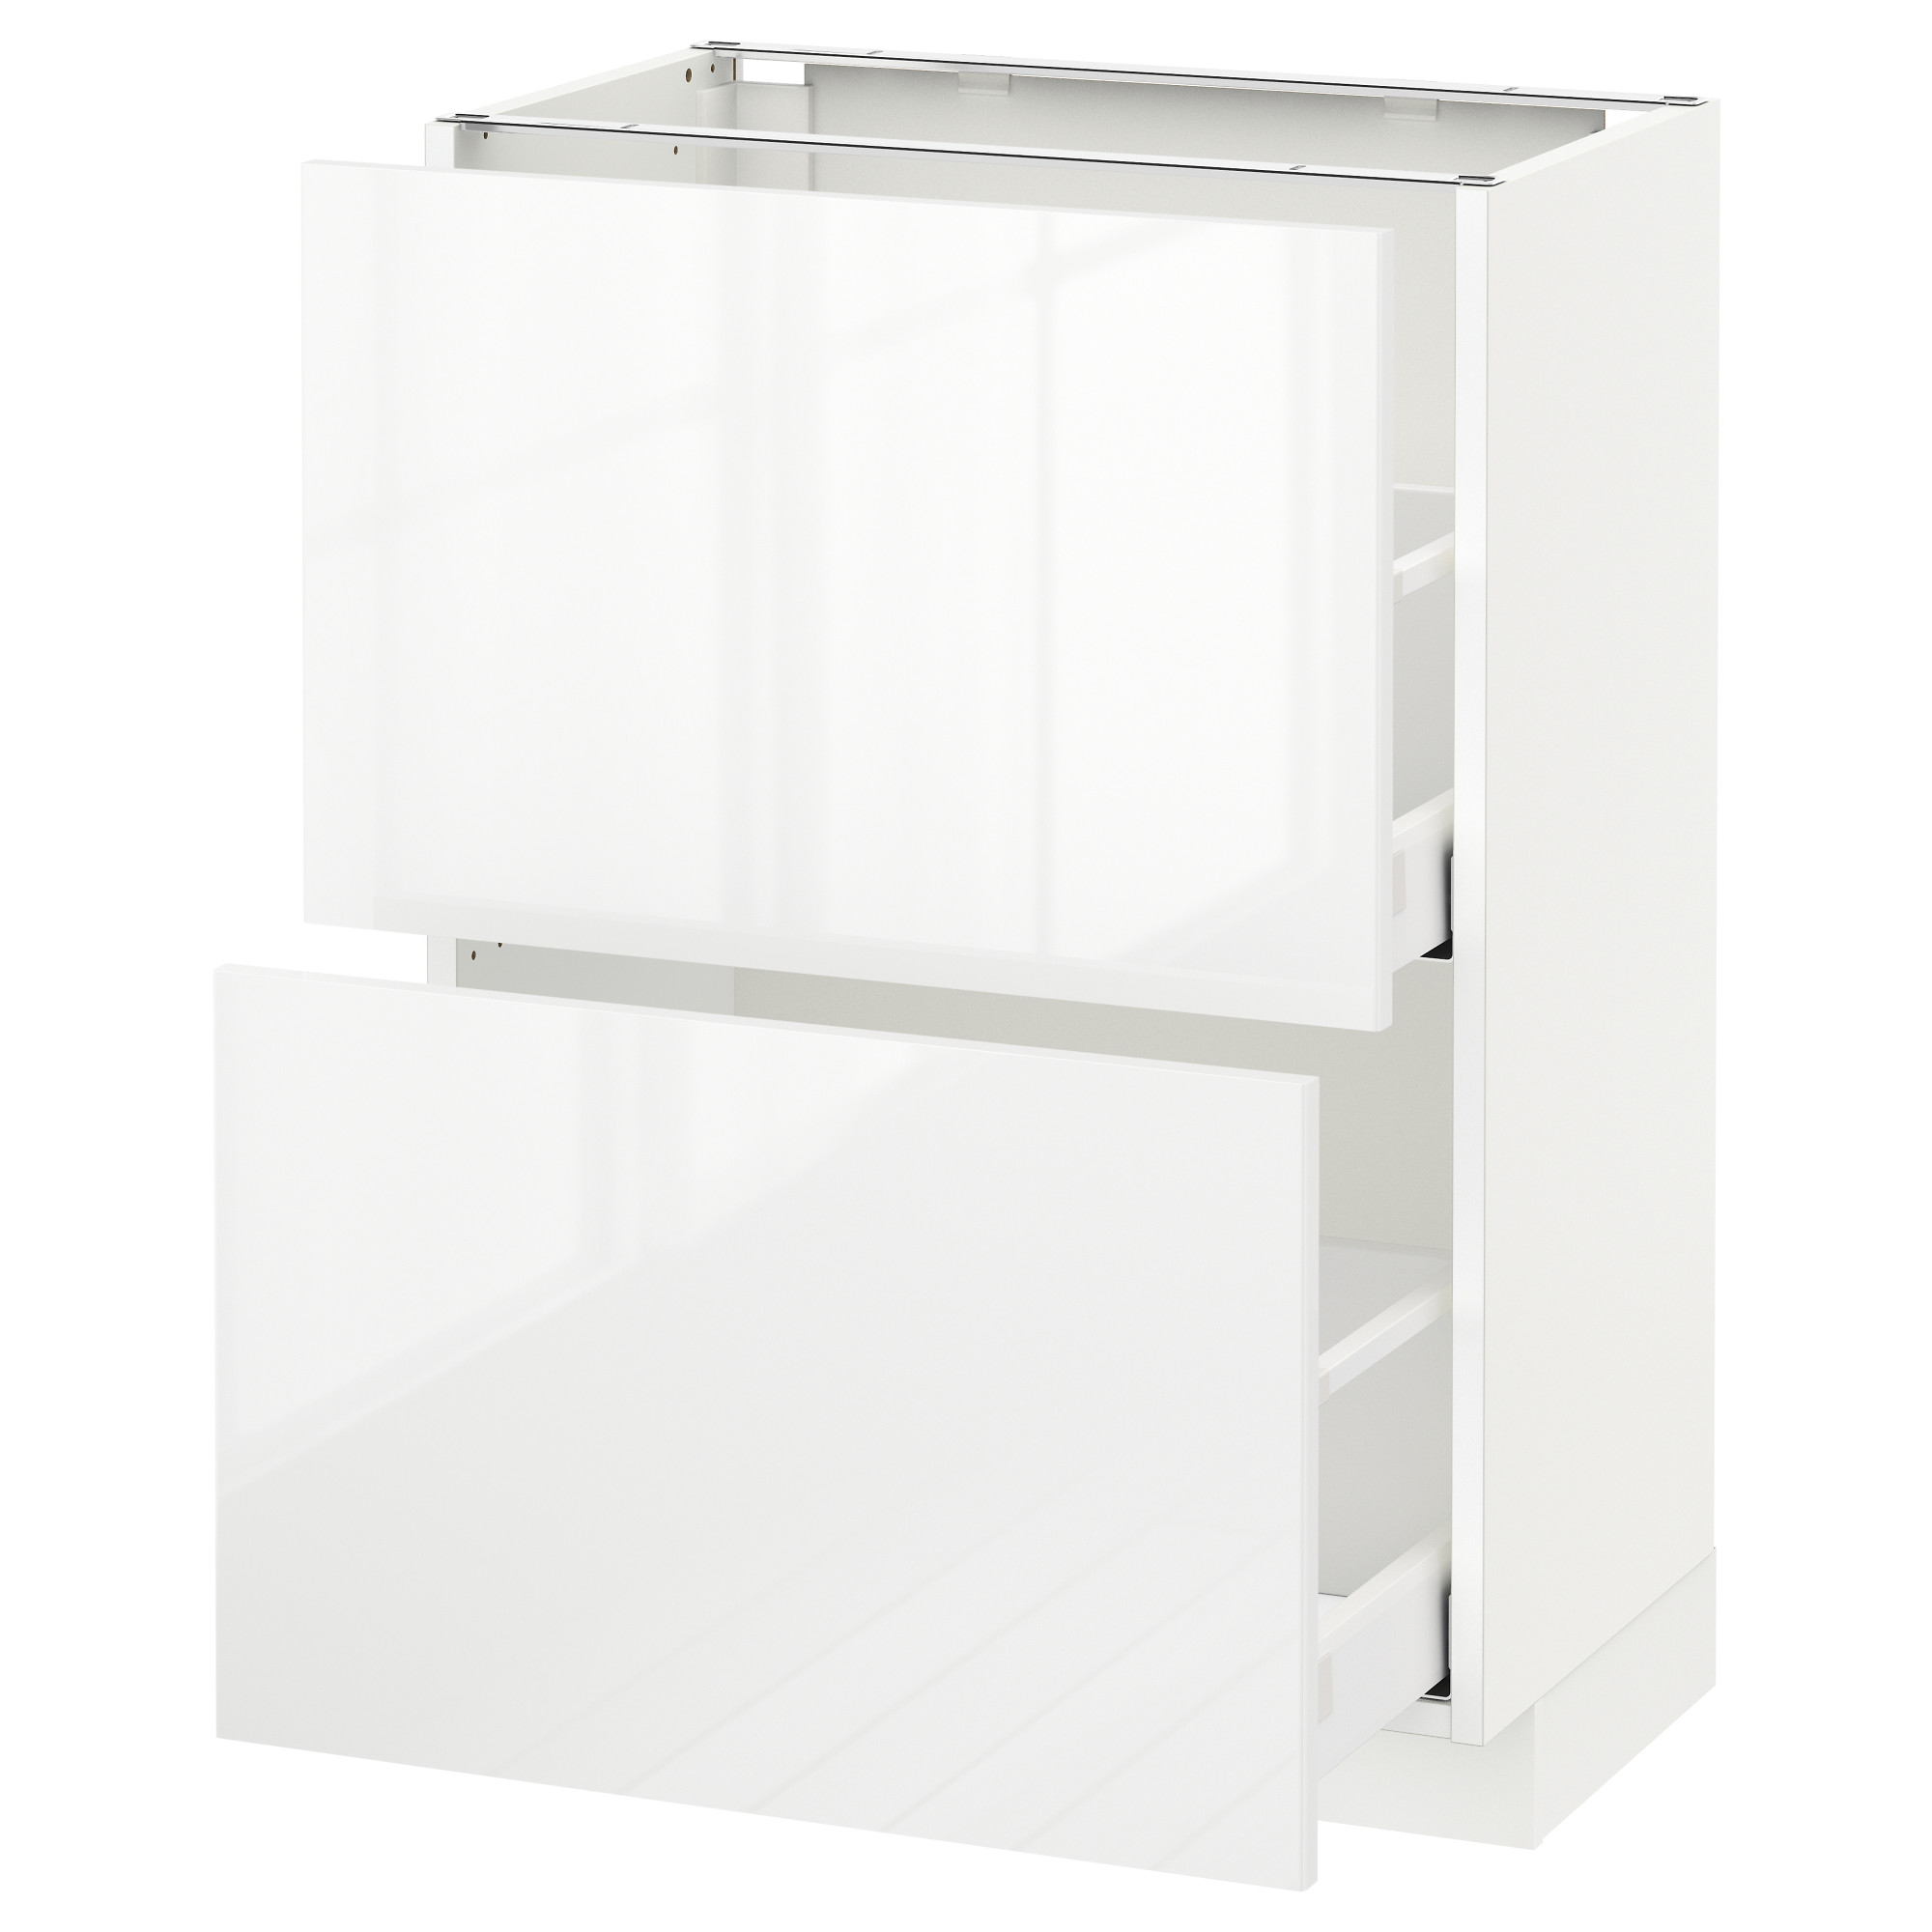 METOD base cabinet with 2 drawers